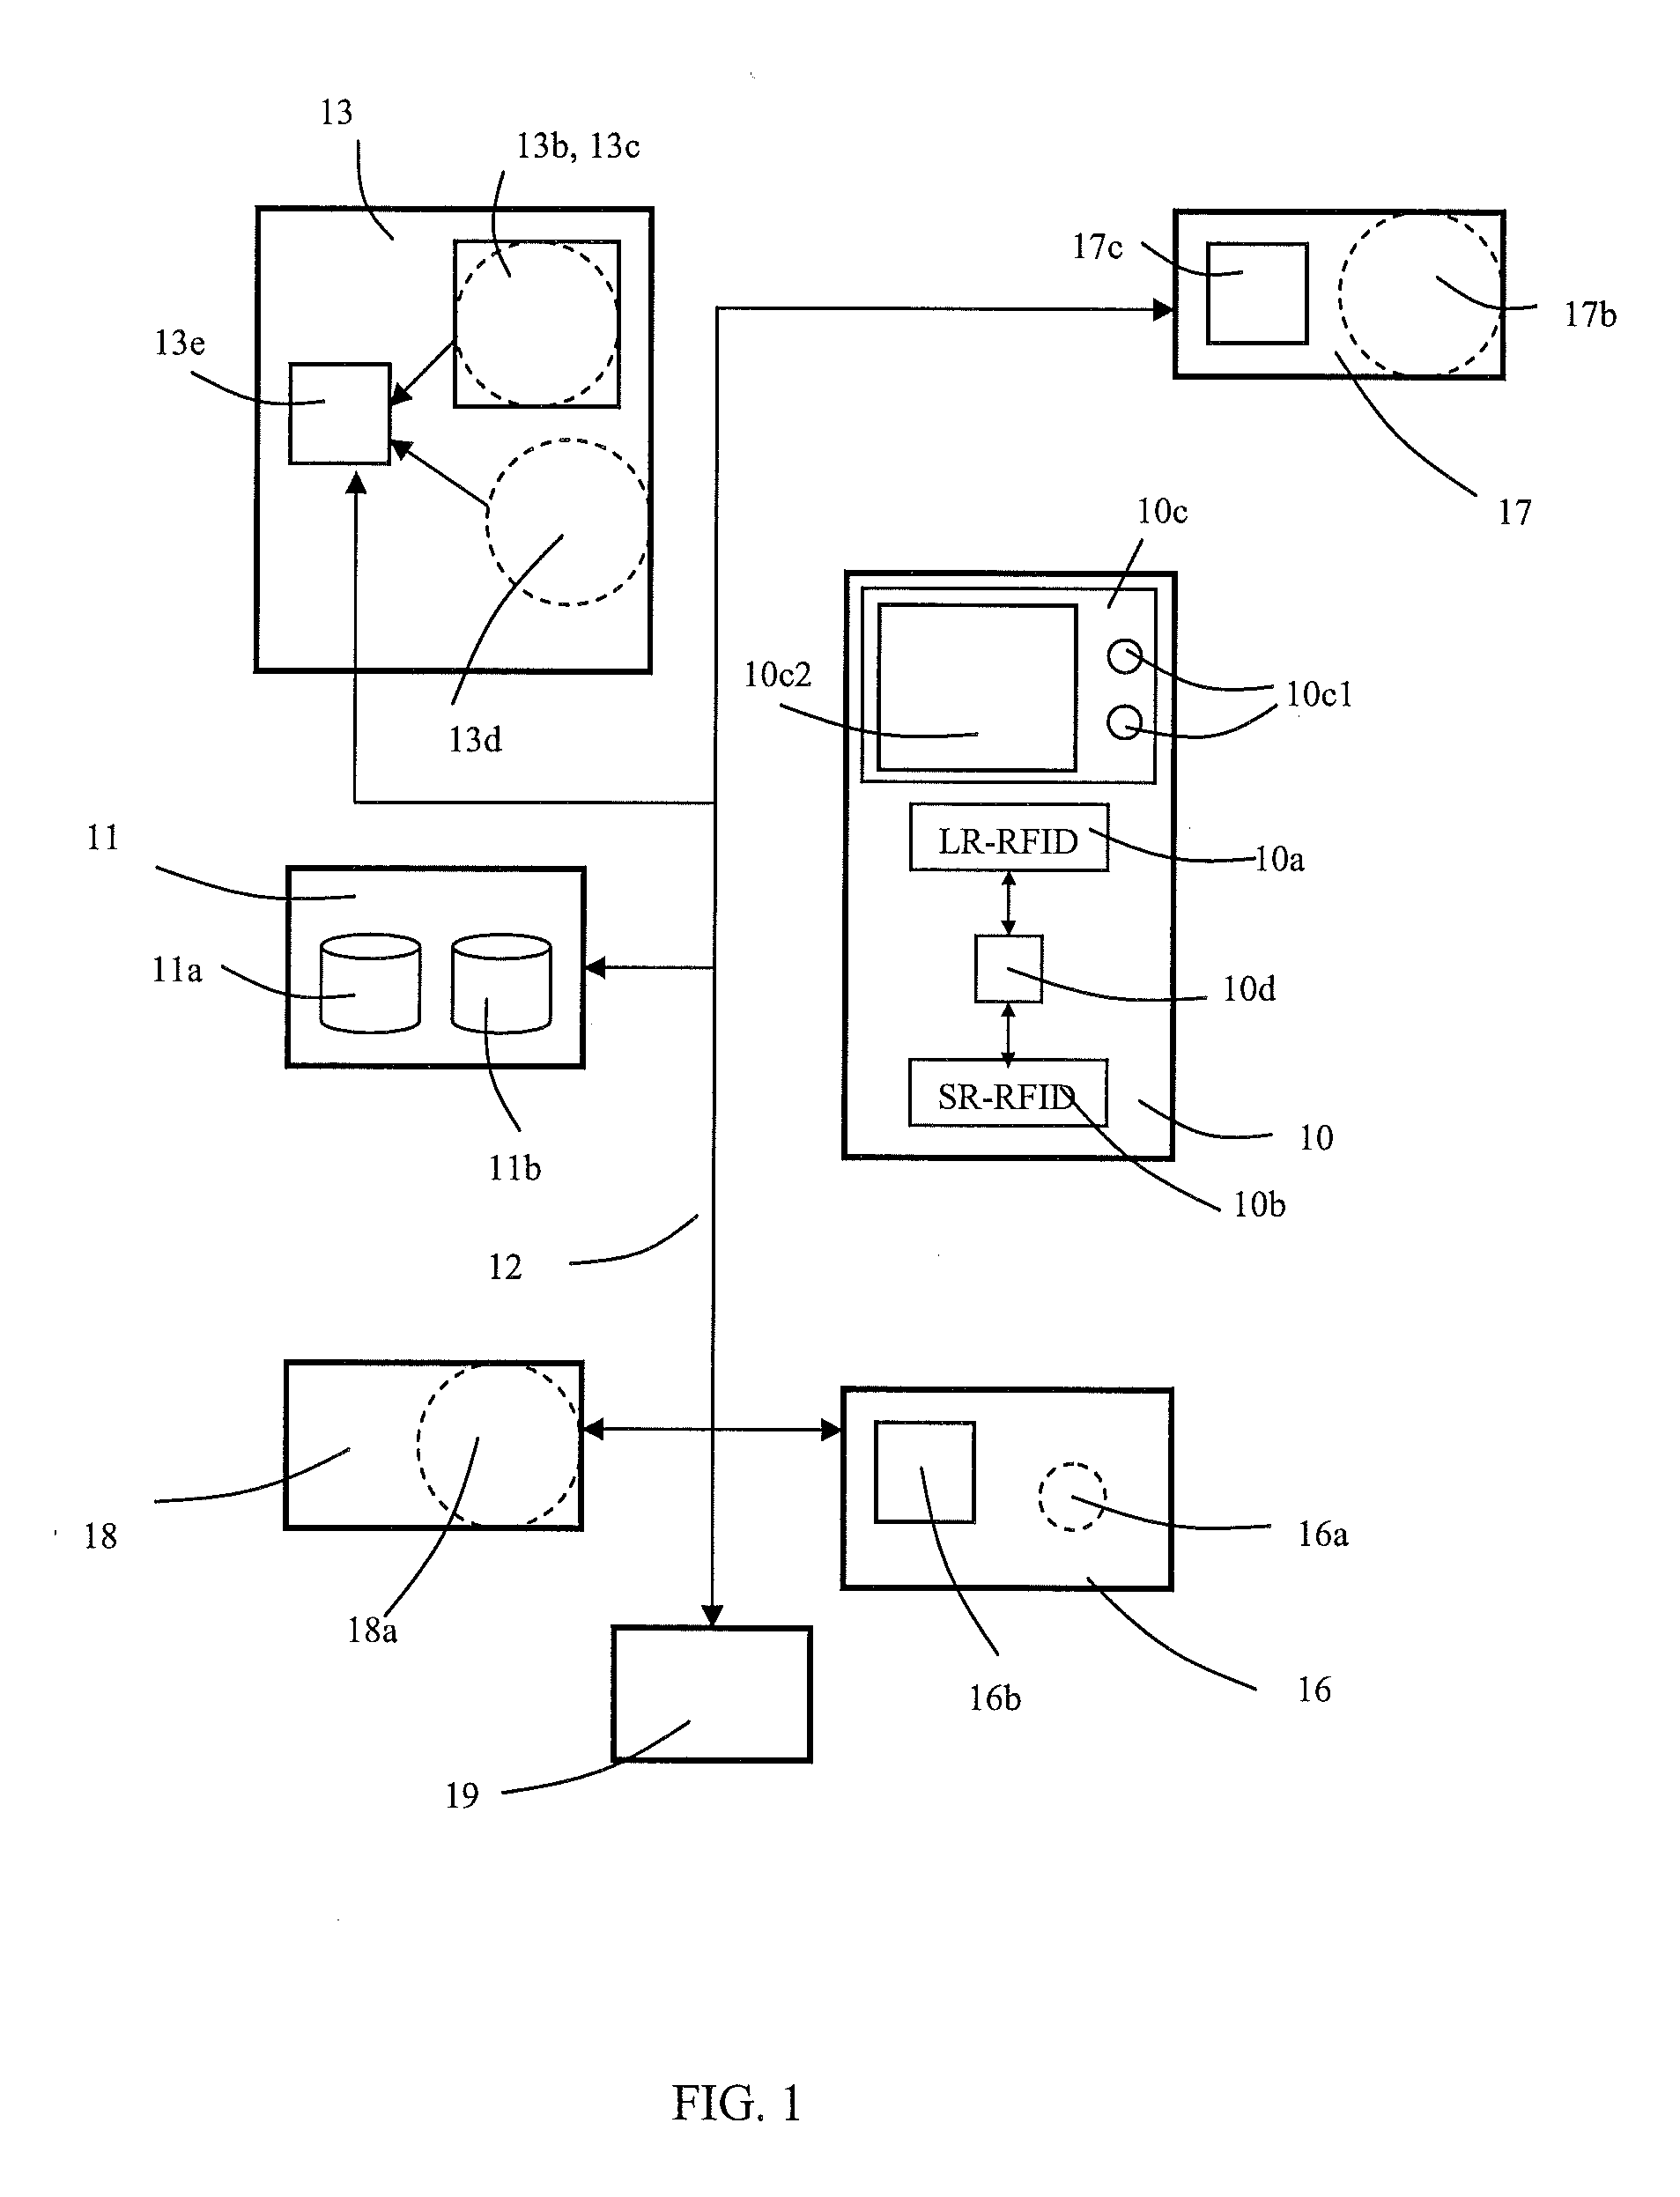 Method and system for limiting access rights